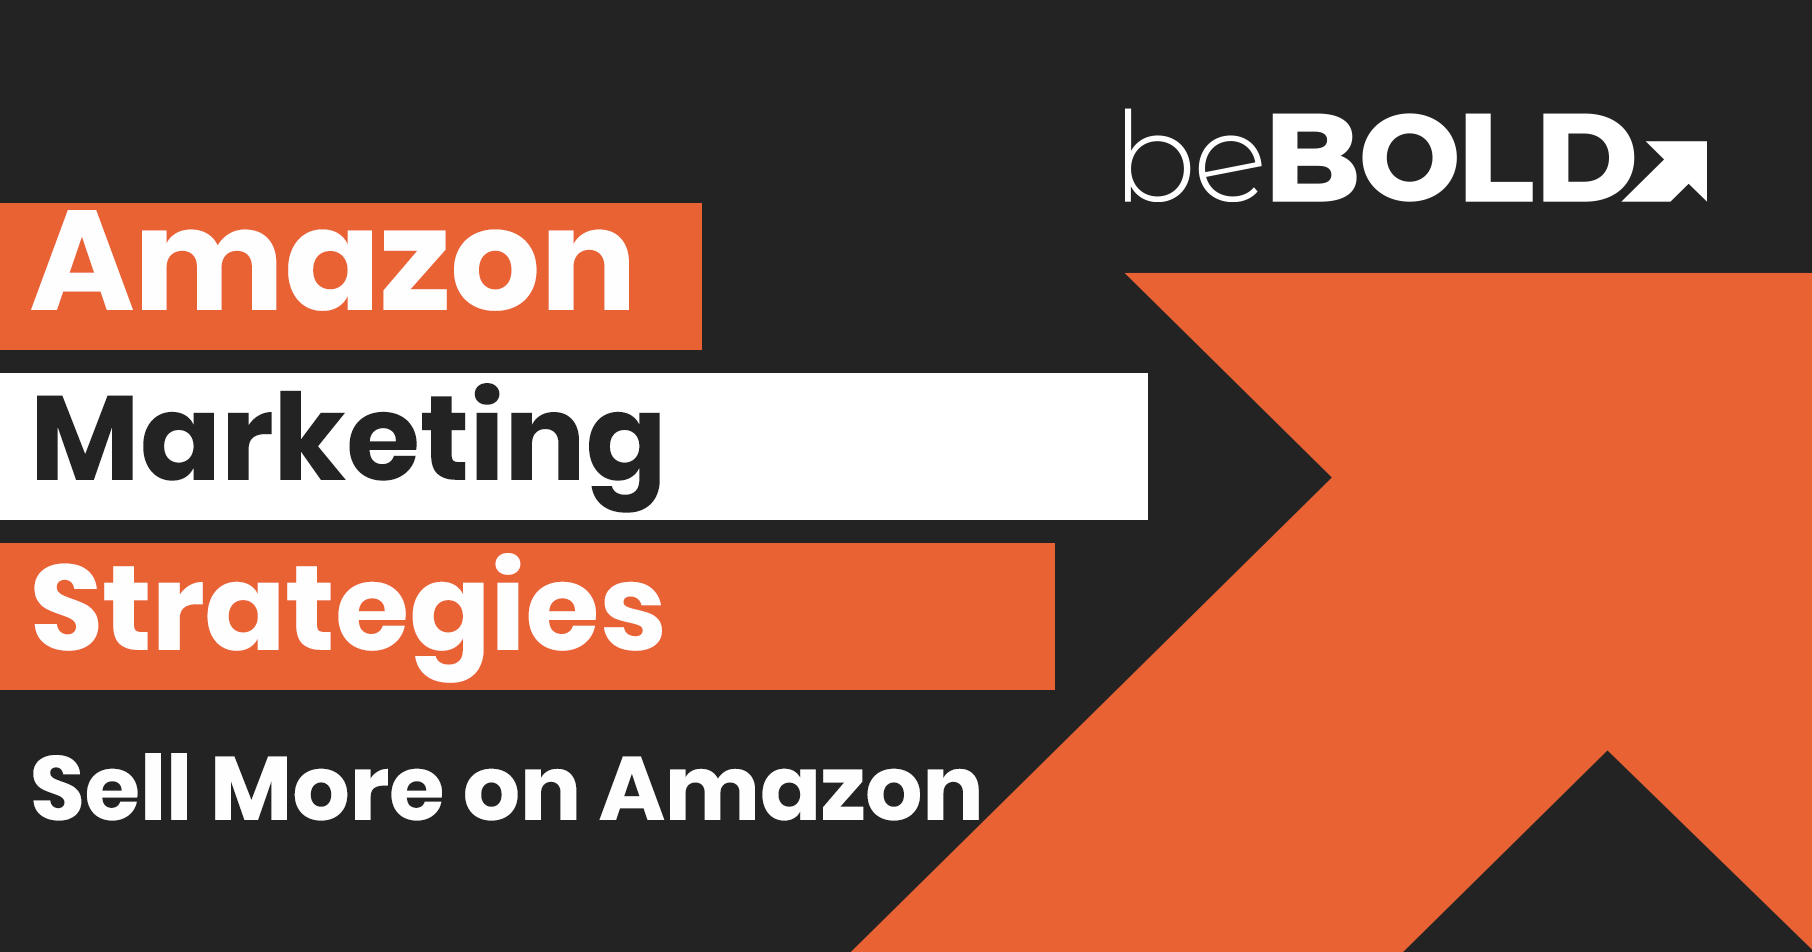 amazon marketing strategies, how to sell more on amazon